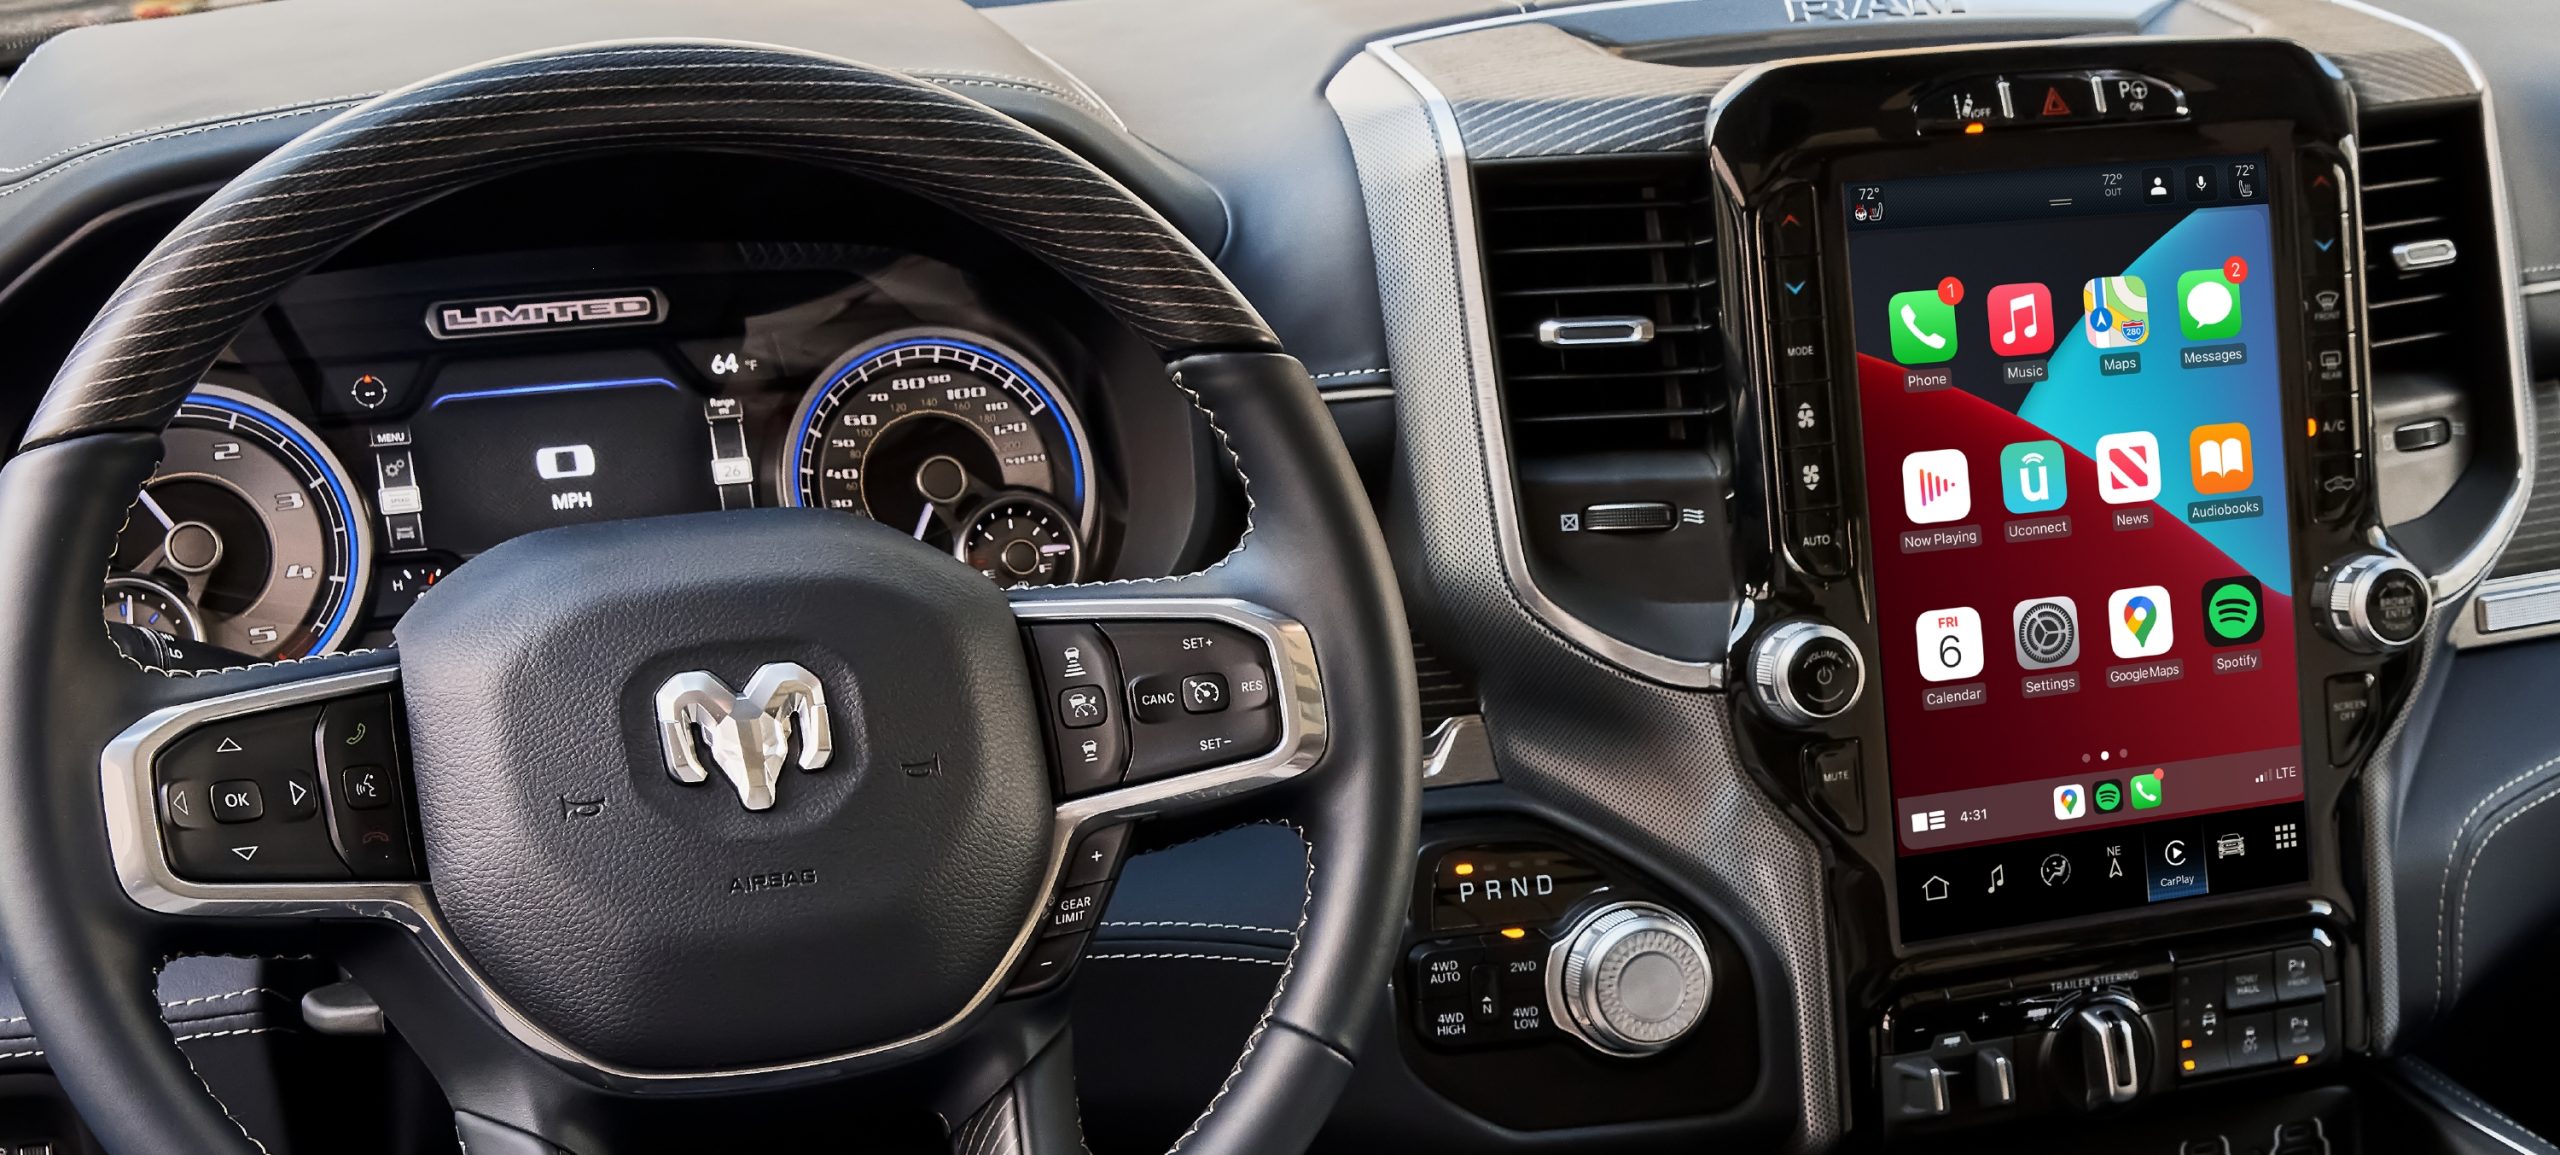 Uconnect 5 infotainment system in a Ram Truck